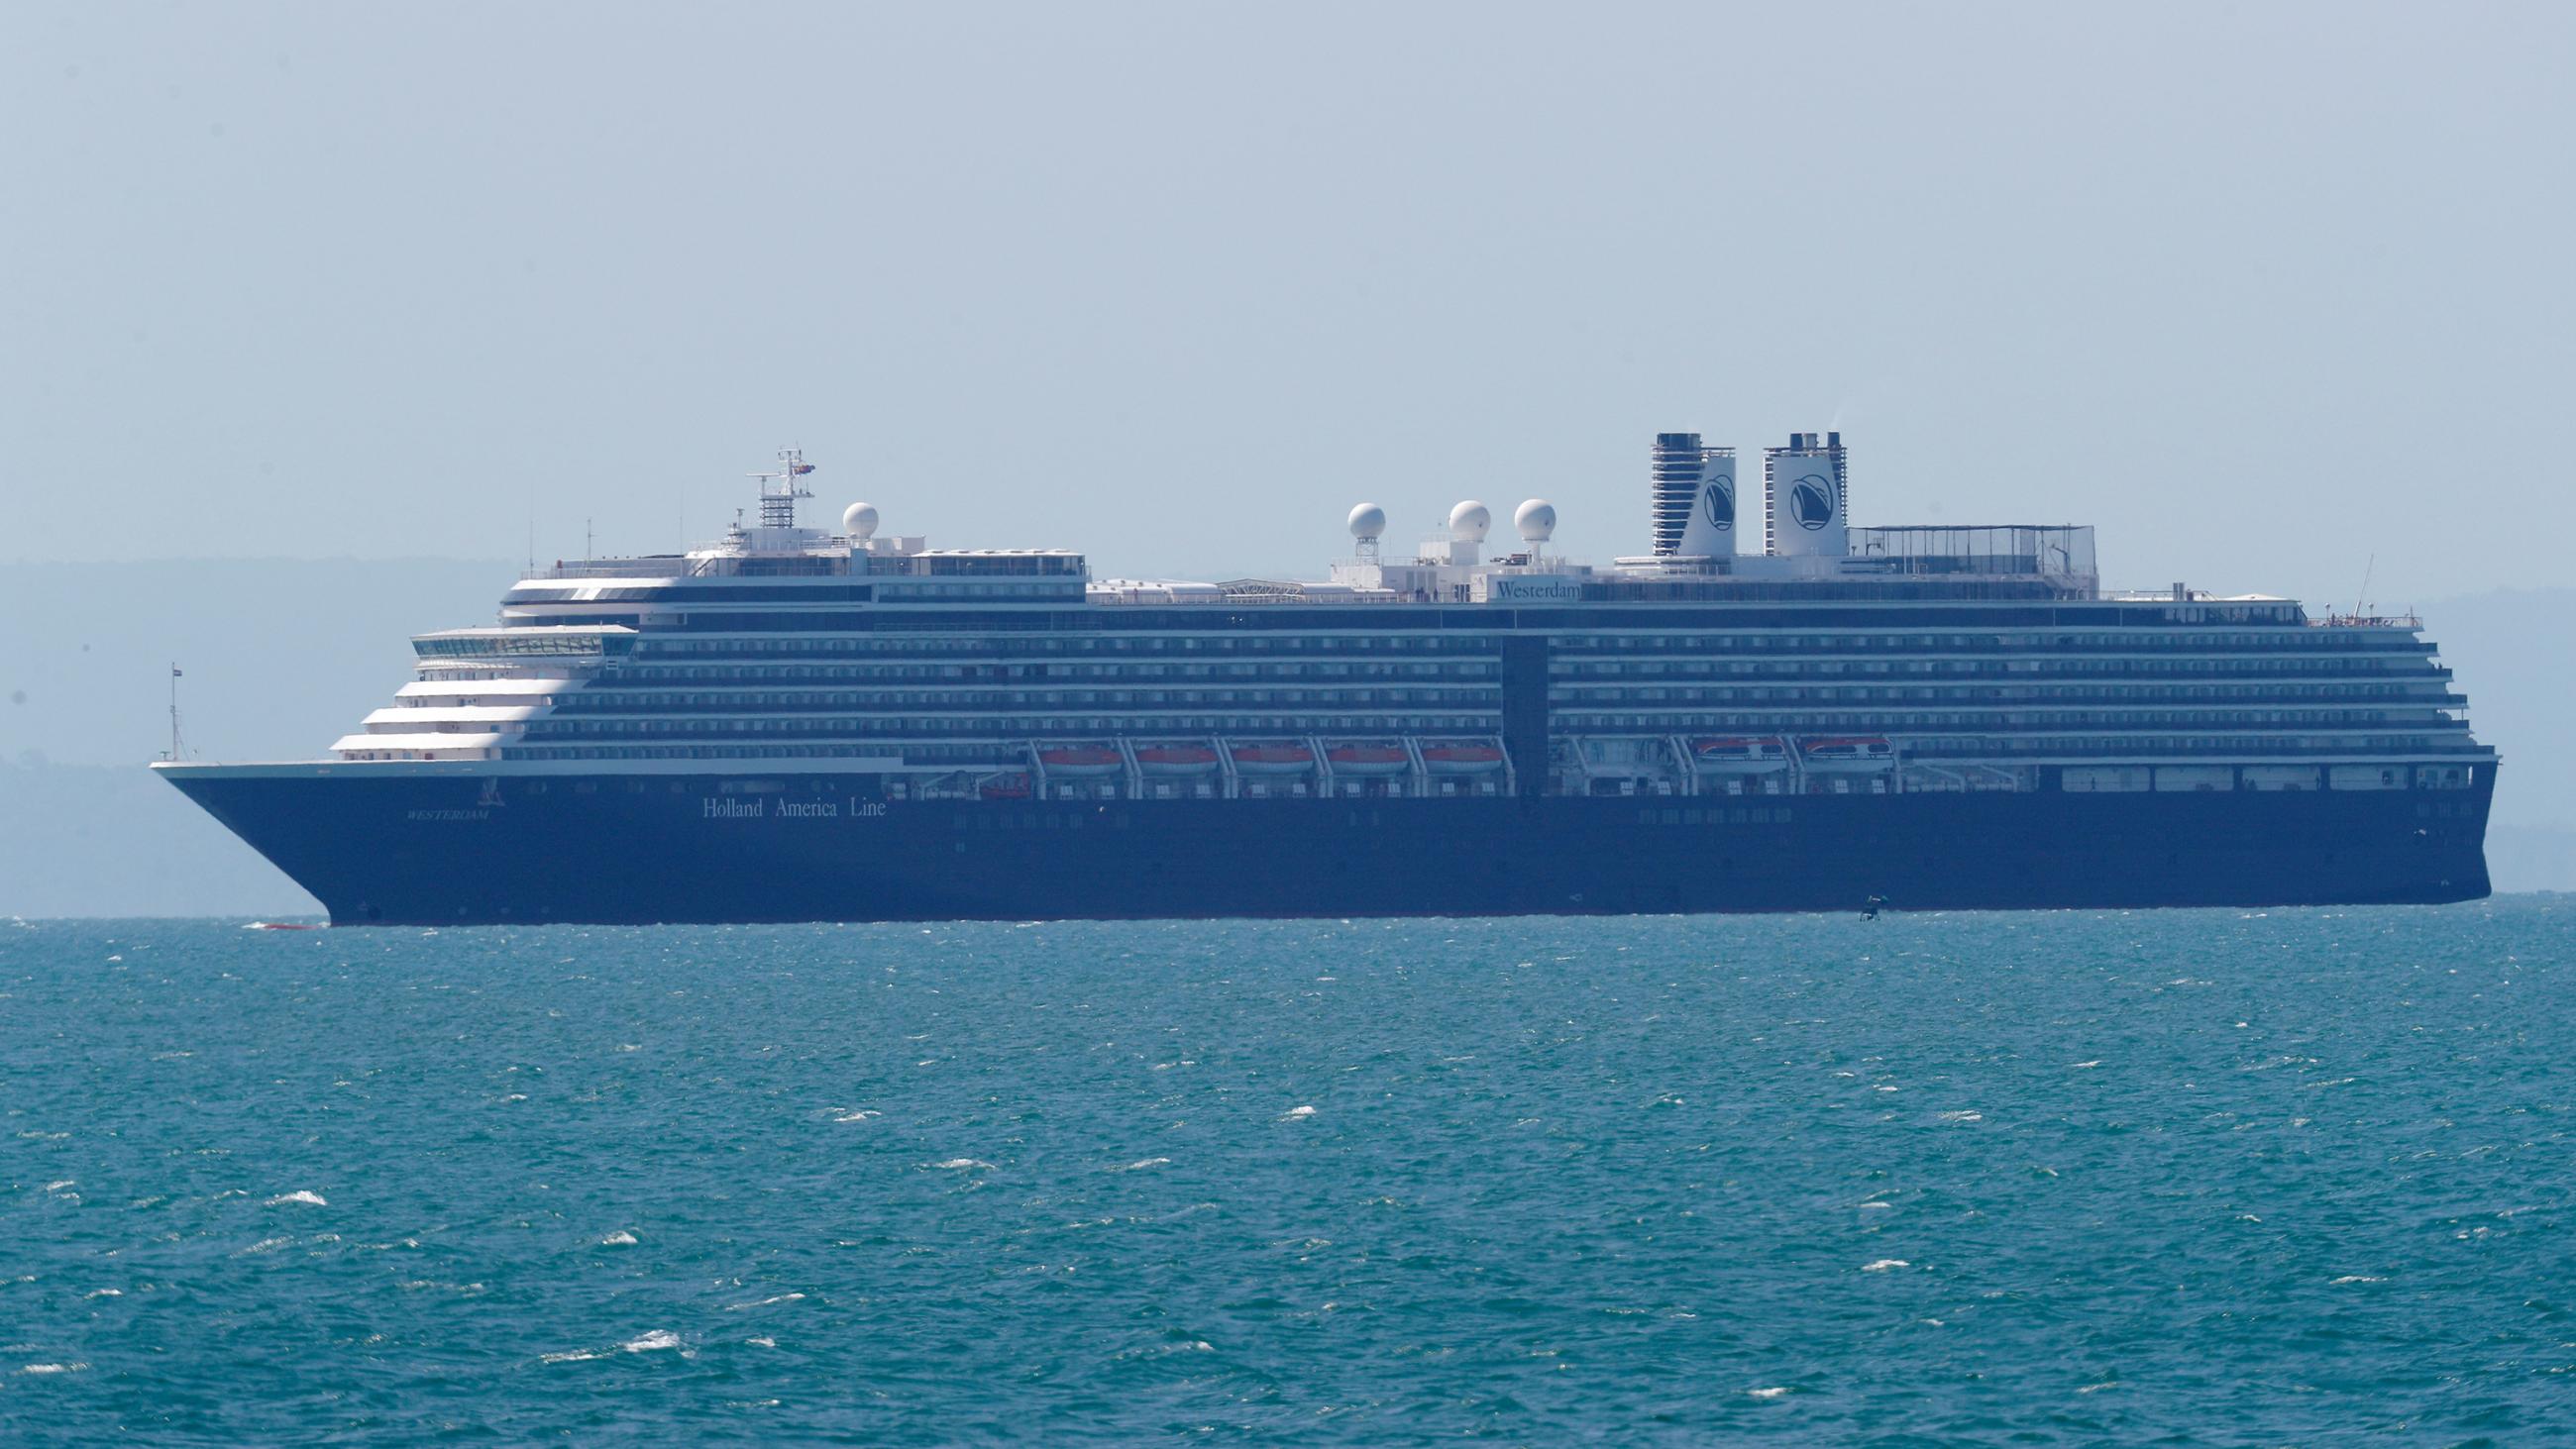 The photo shows a massive luxury cruise ship off in the distance, in a photo presumably taken from shore. 